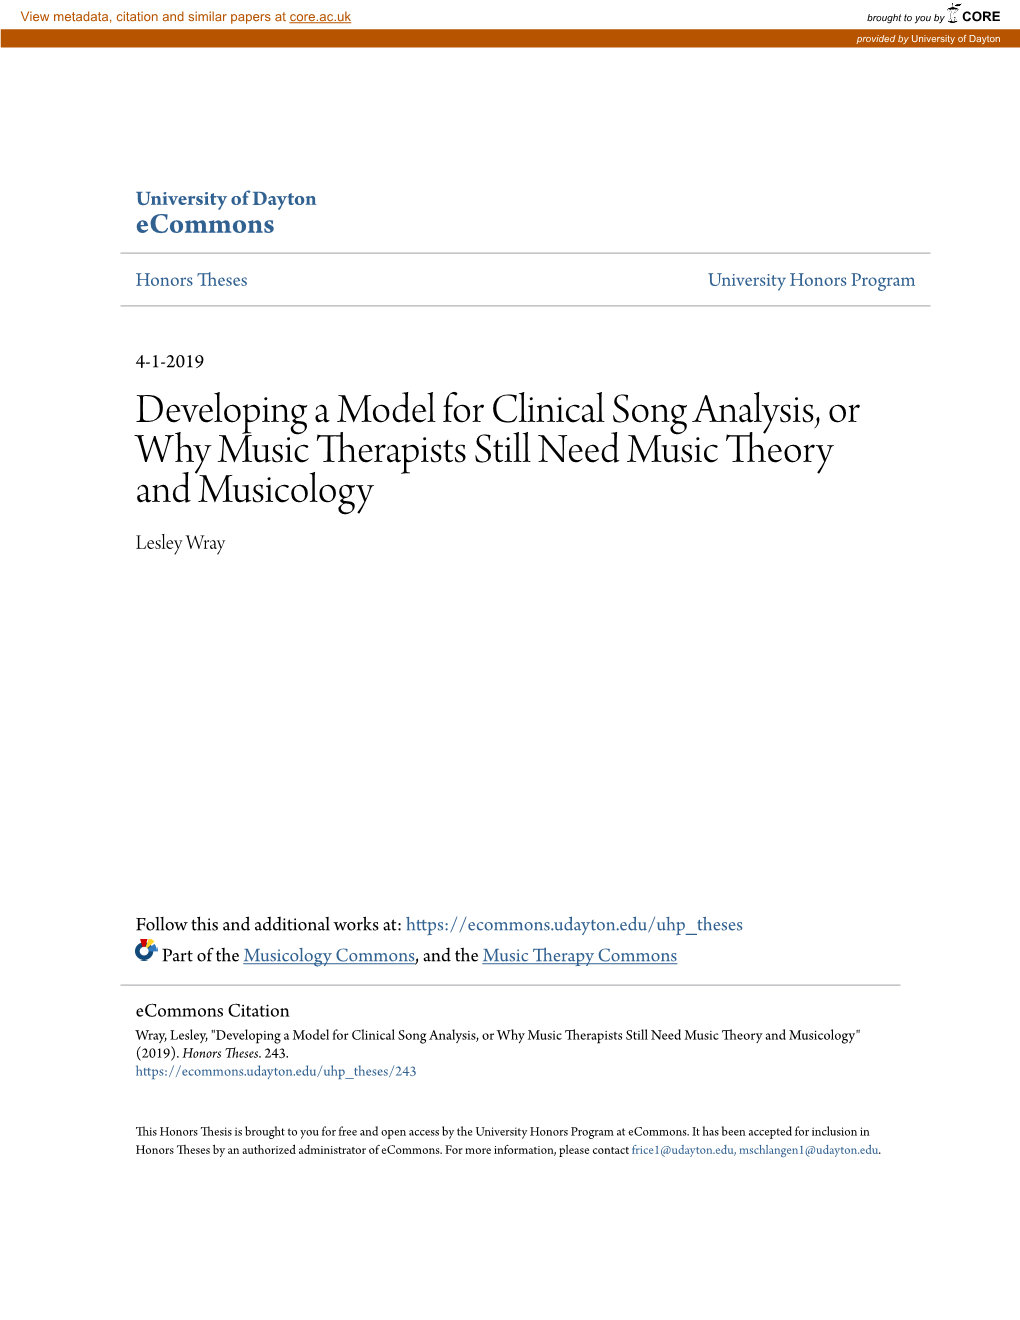 Developing a Model for Clinical Song Analysis, Or Why Music Therapists Still Need Music Theory and Musicology Lesley Wray